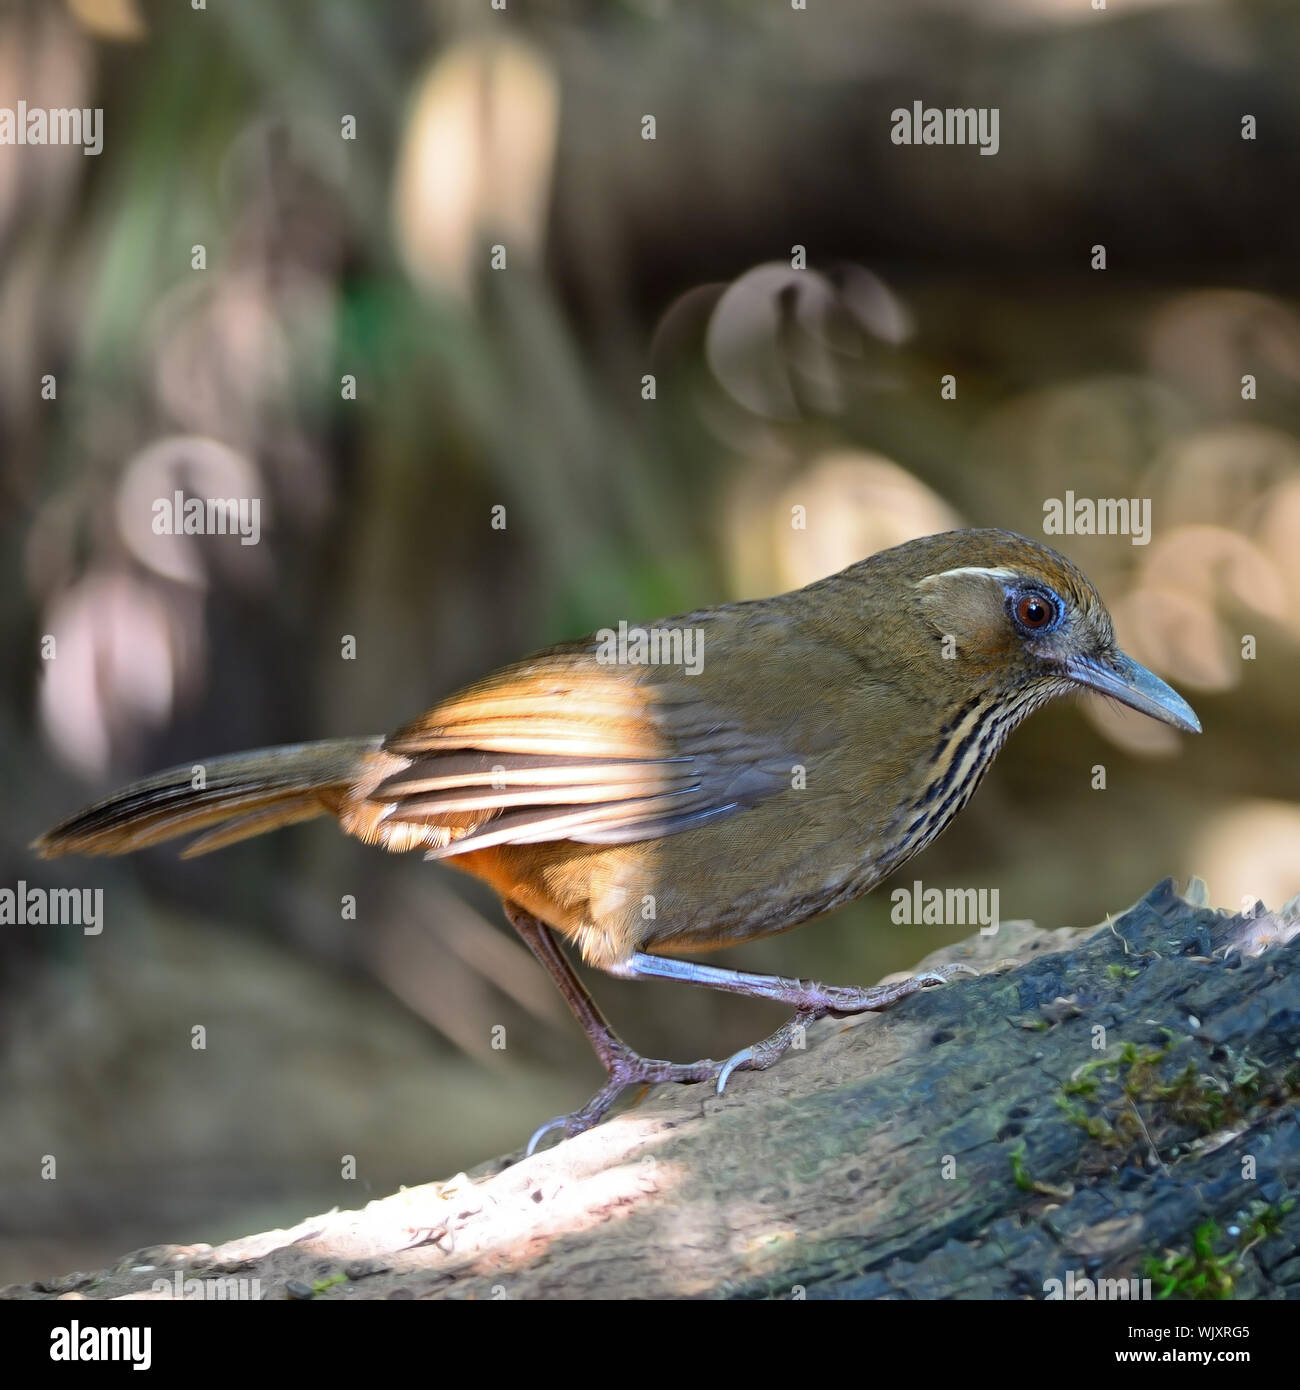 Spot-breasted Laughingthrush (Stactocichia merulina), uncommon species of Laughingthrush bird, side profile, taken in Thailand Stock Photo